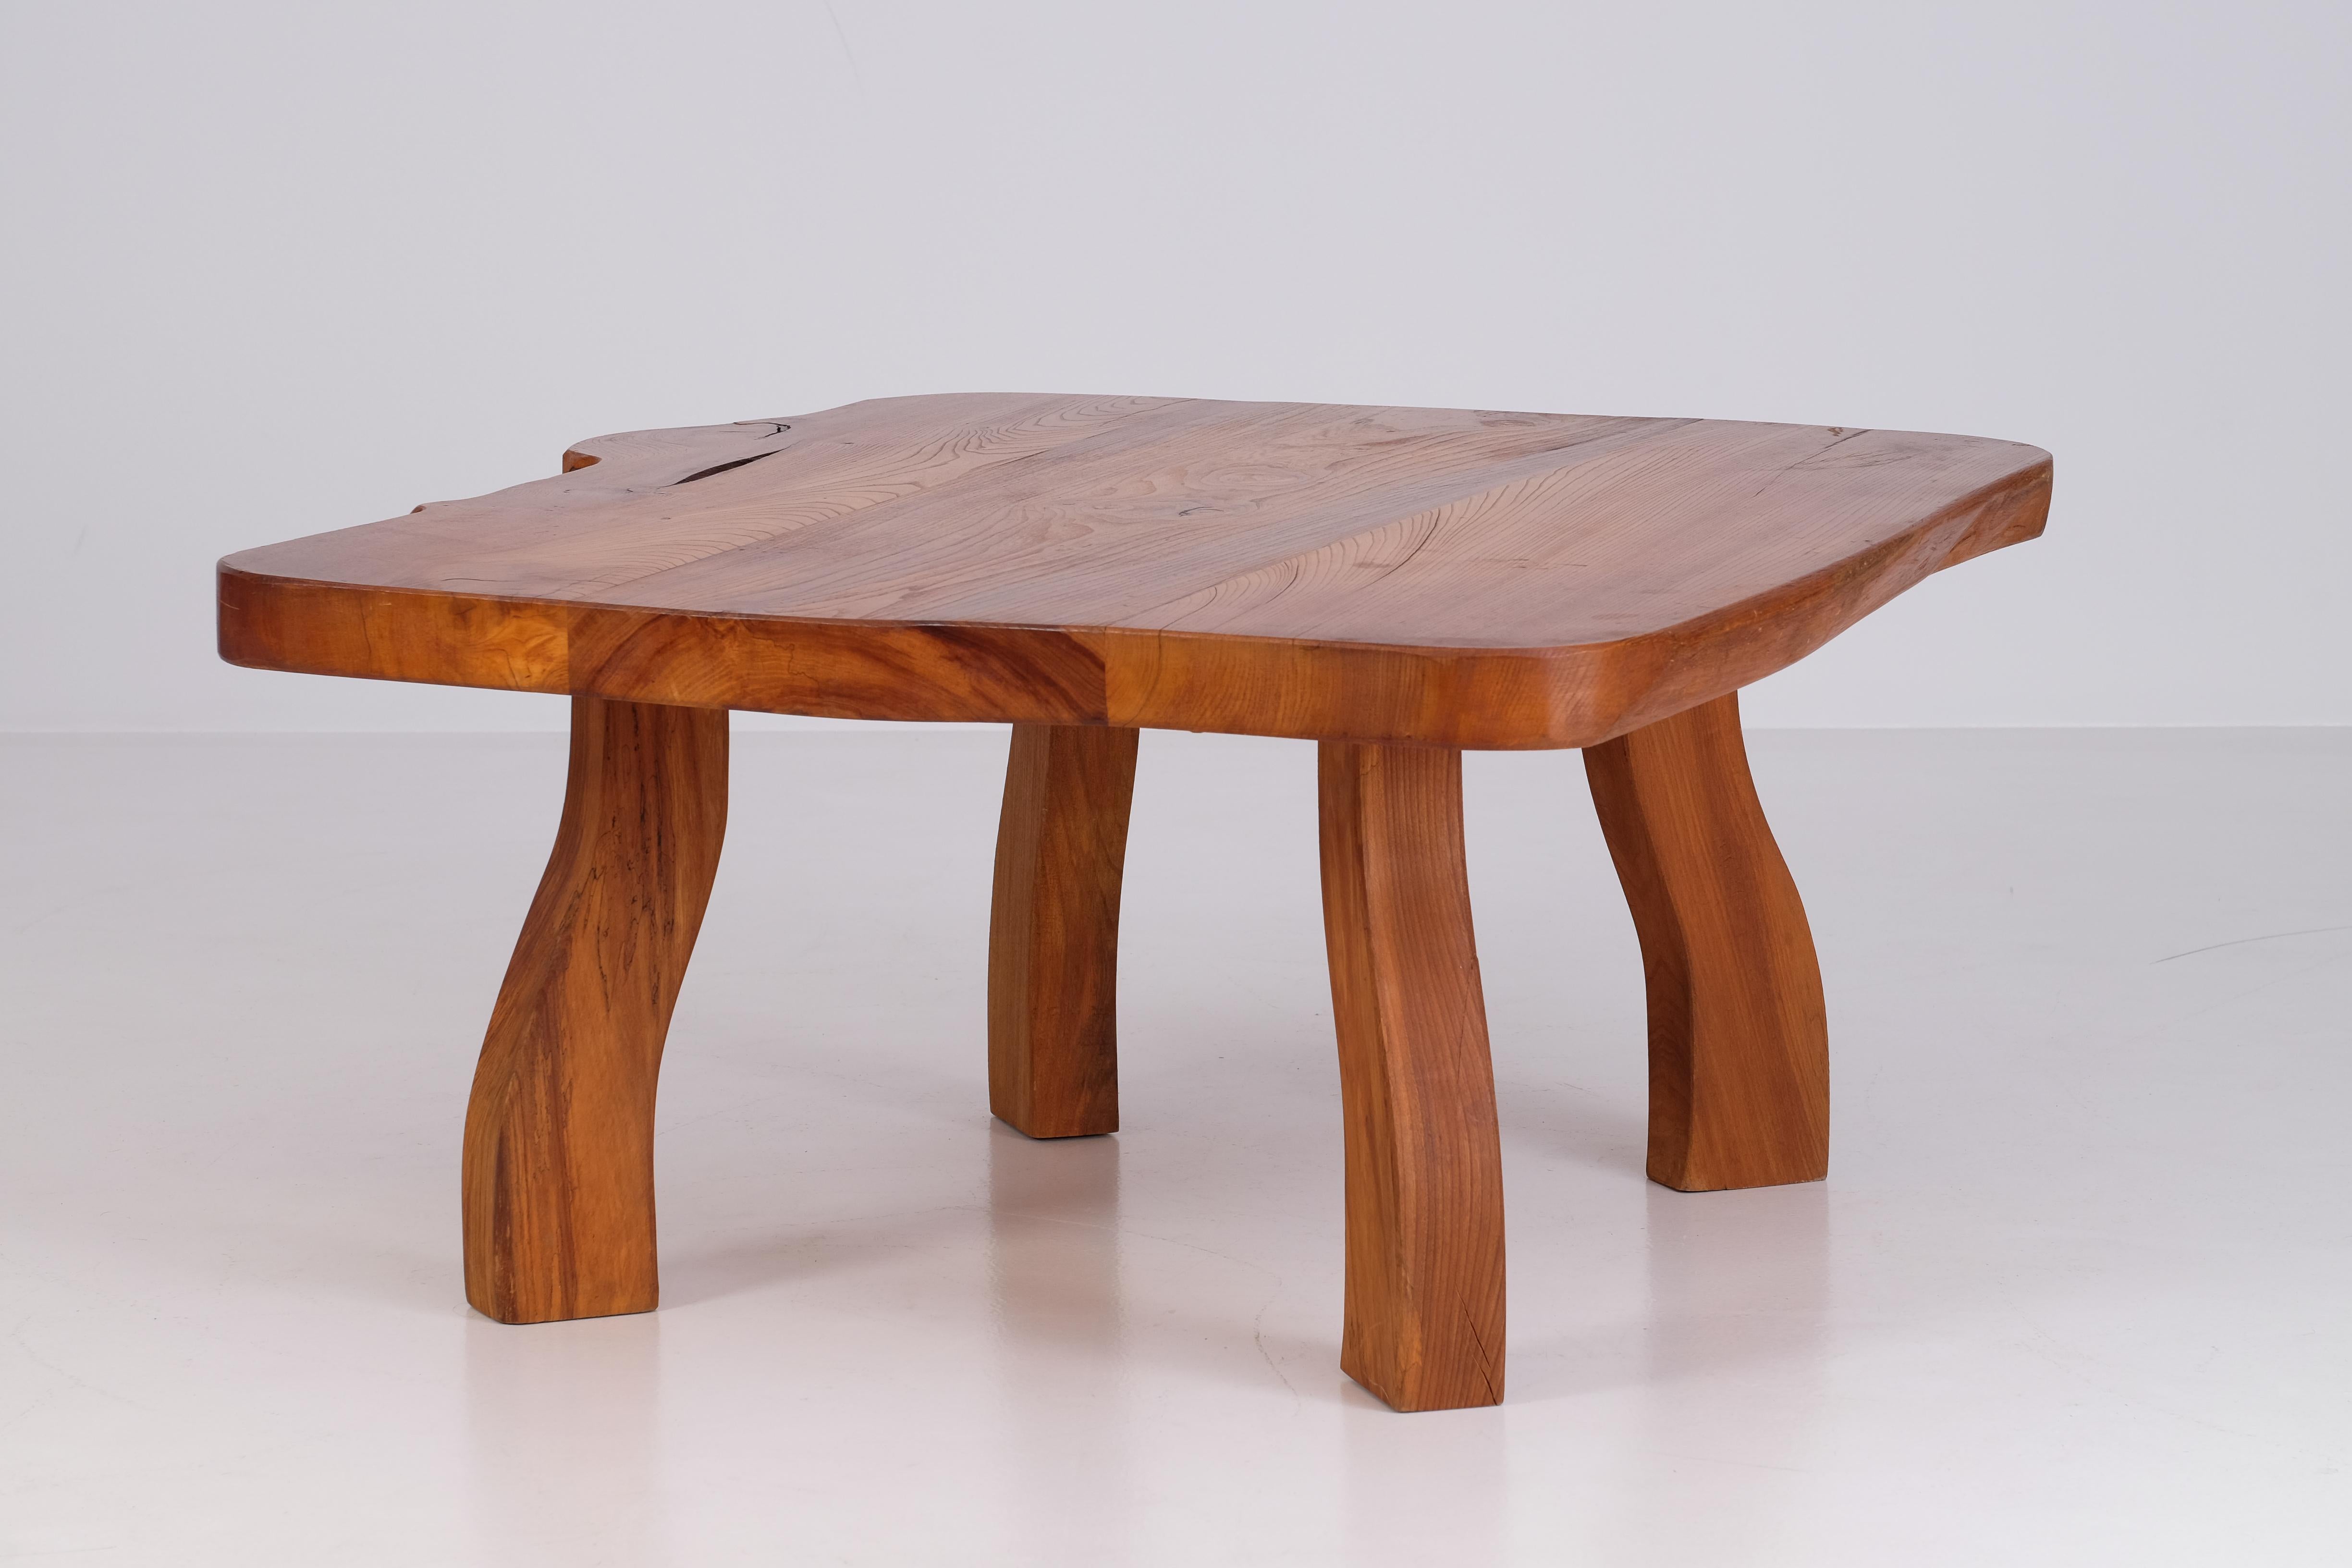 Swedish Naturalistic Coffee Table by C. A. Beijbom, 1974 For Sale